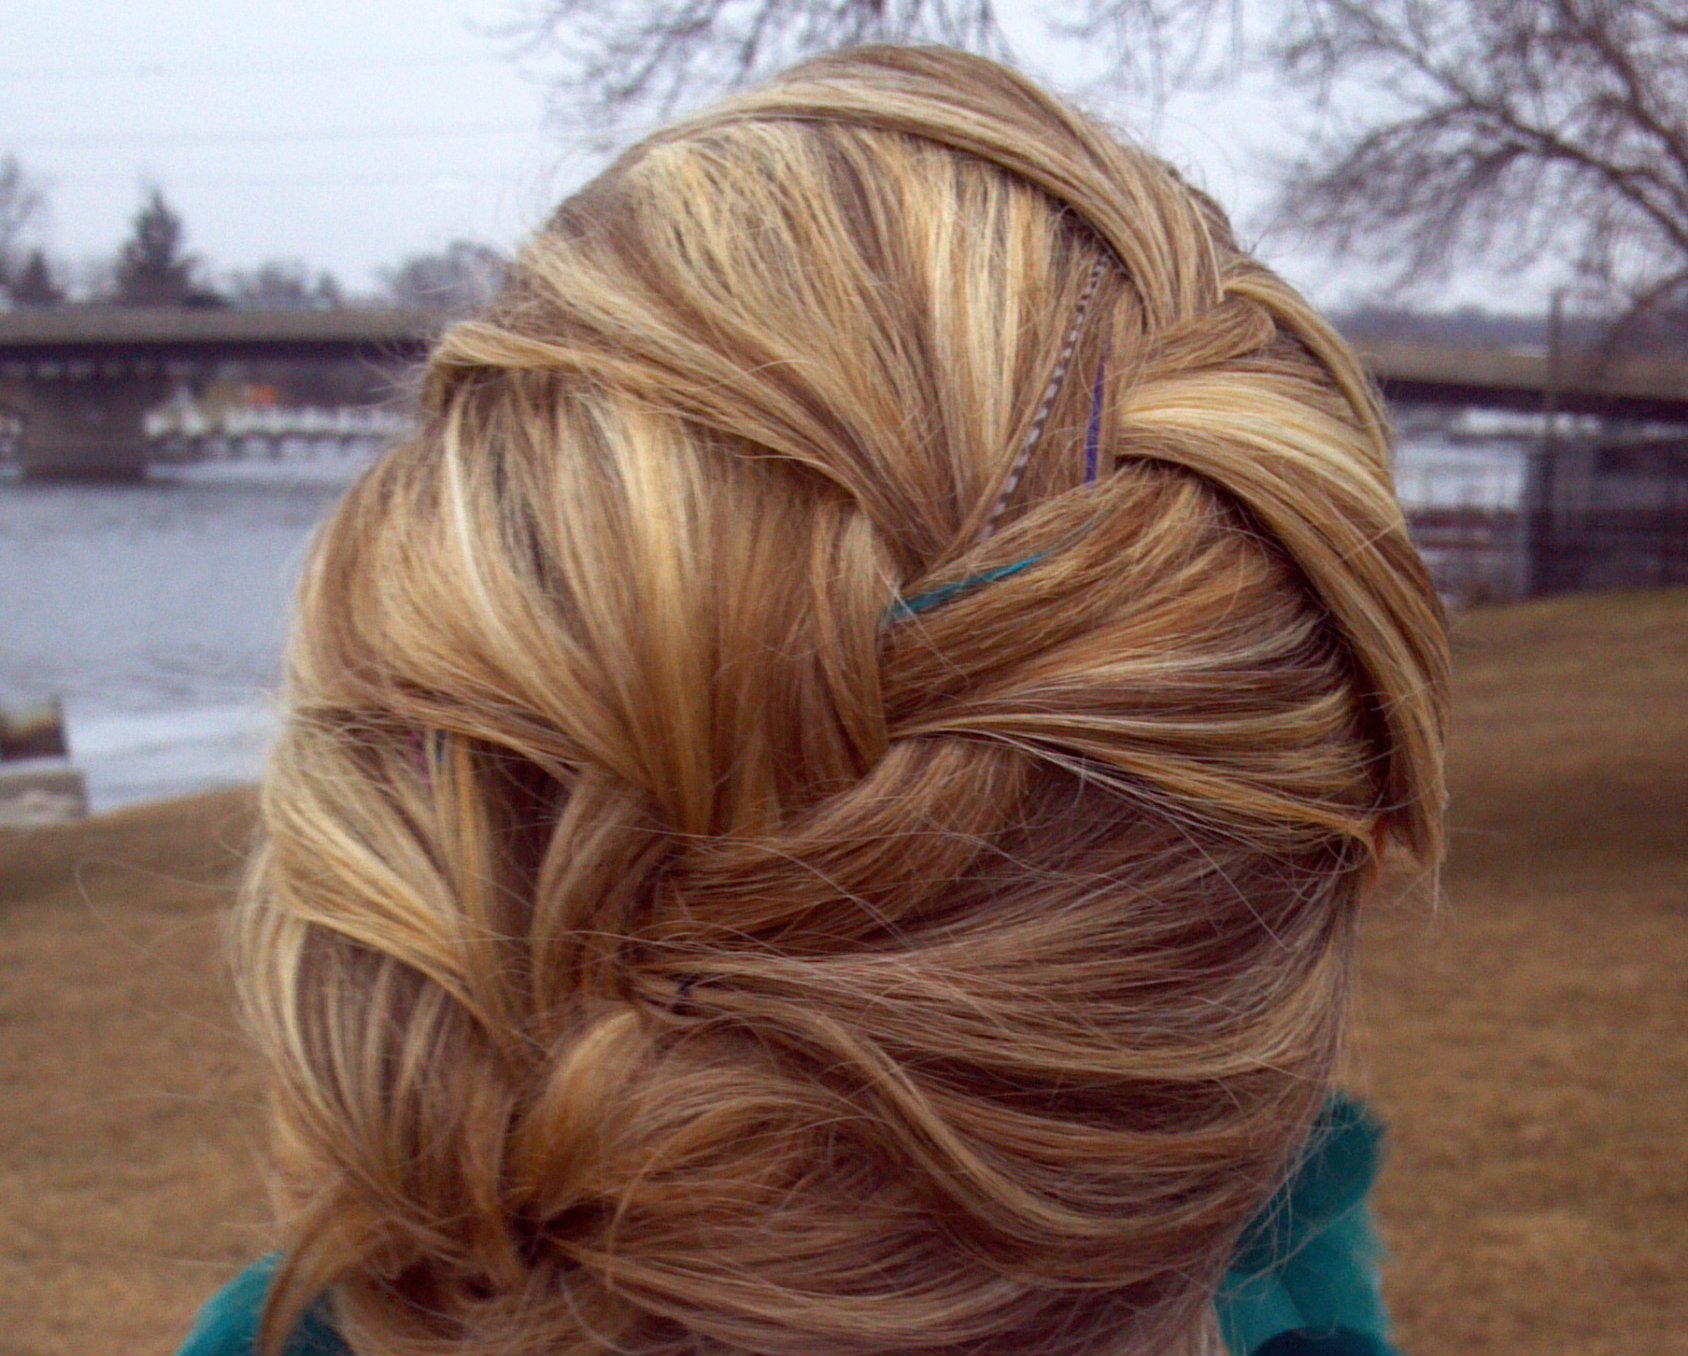 A Simple Braided Updo!